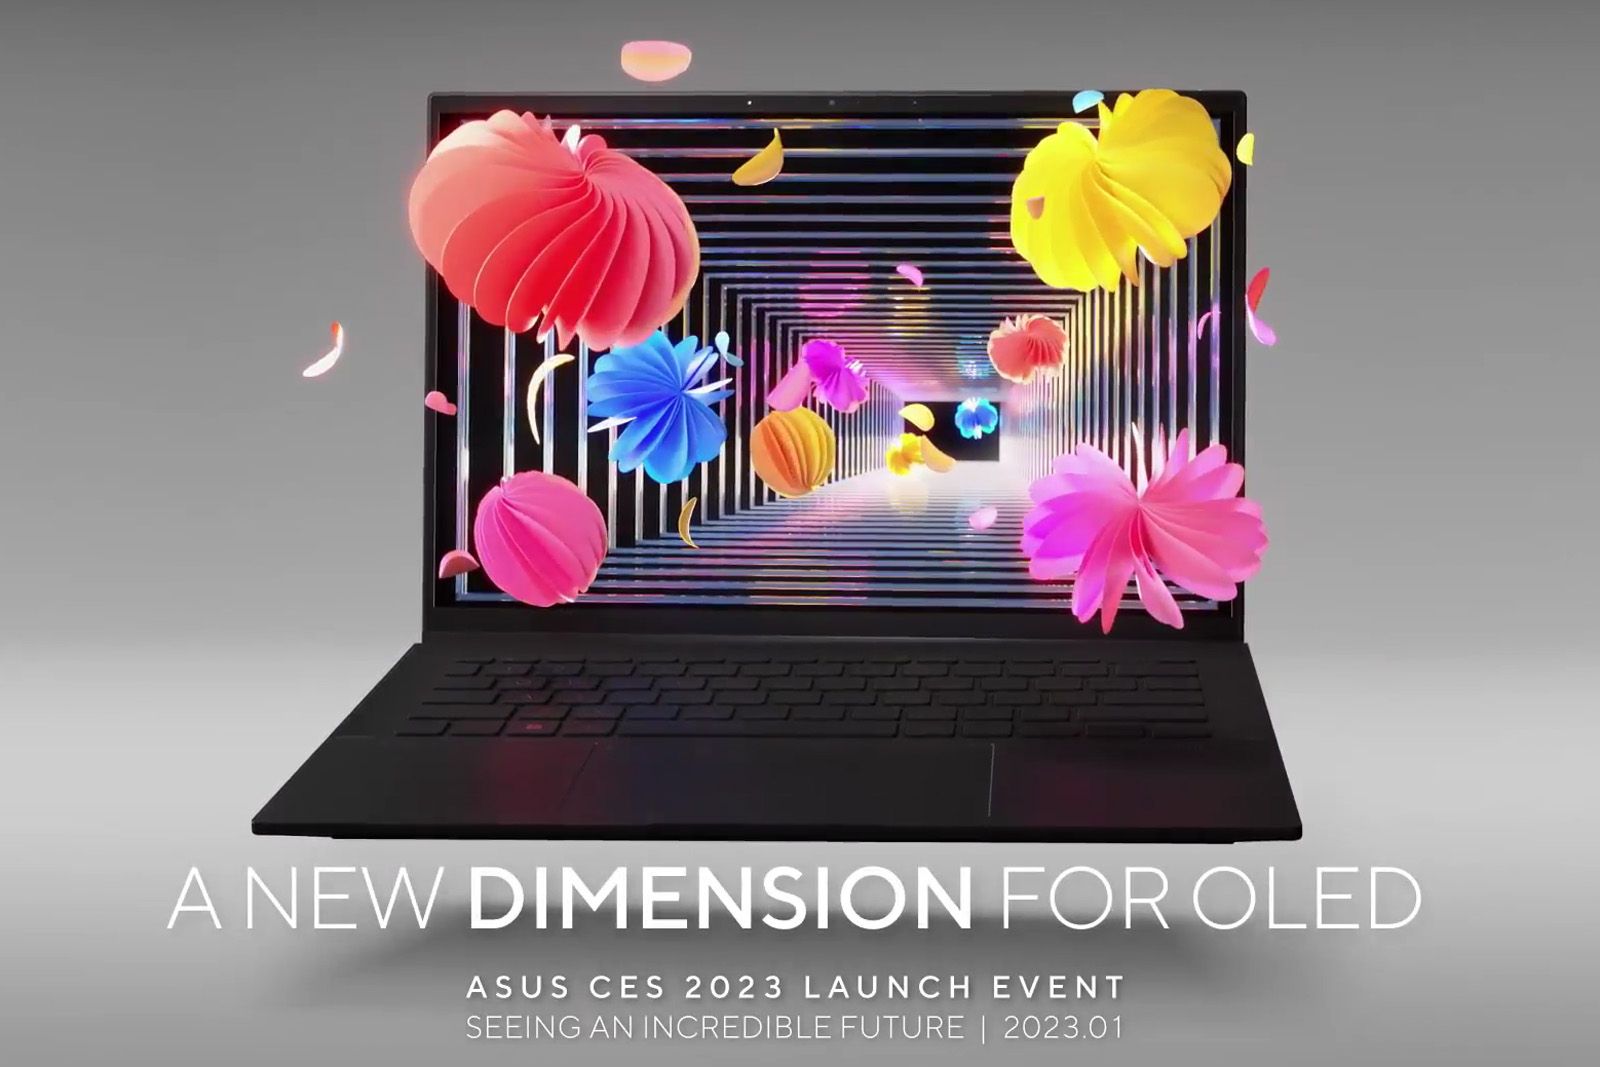 How to watch Asus event photo 2